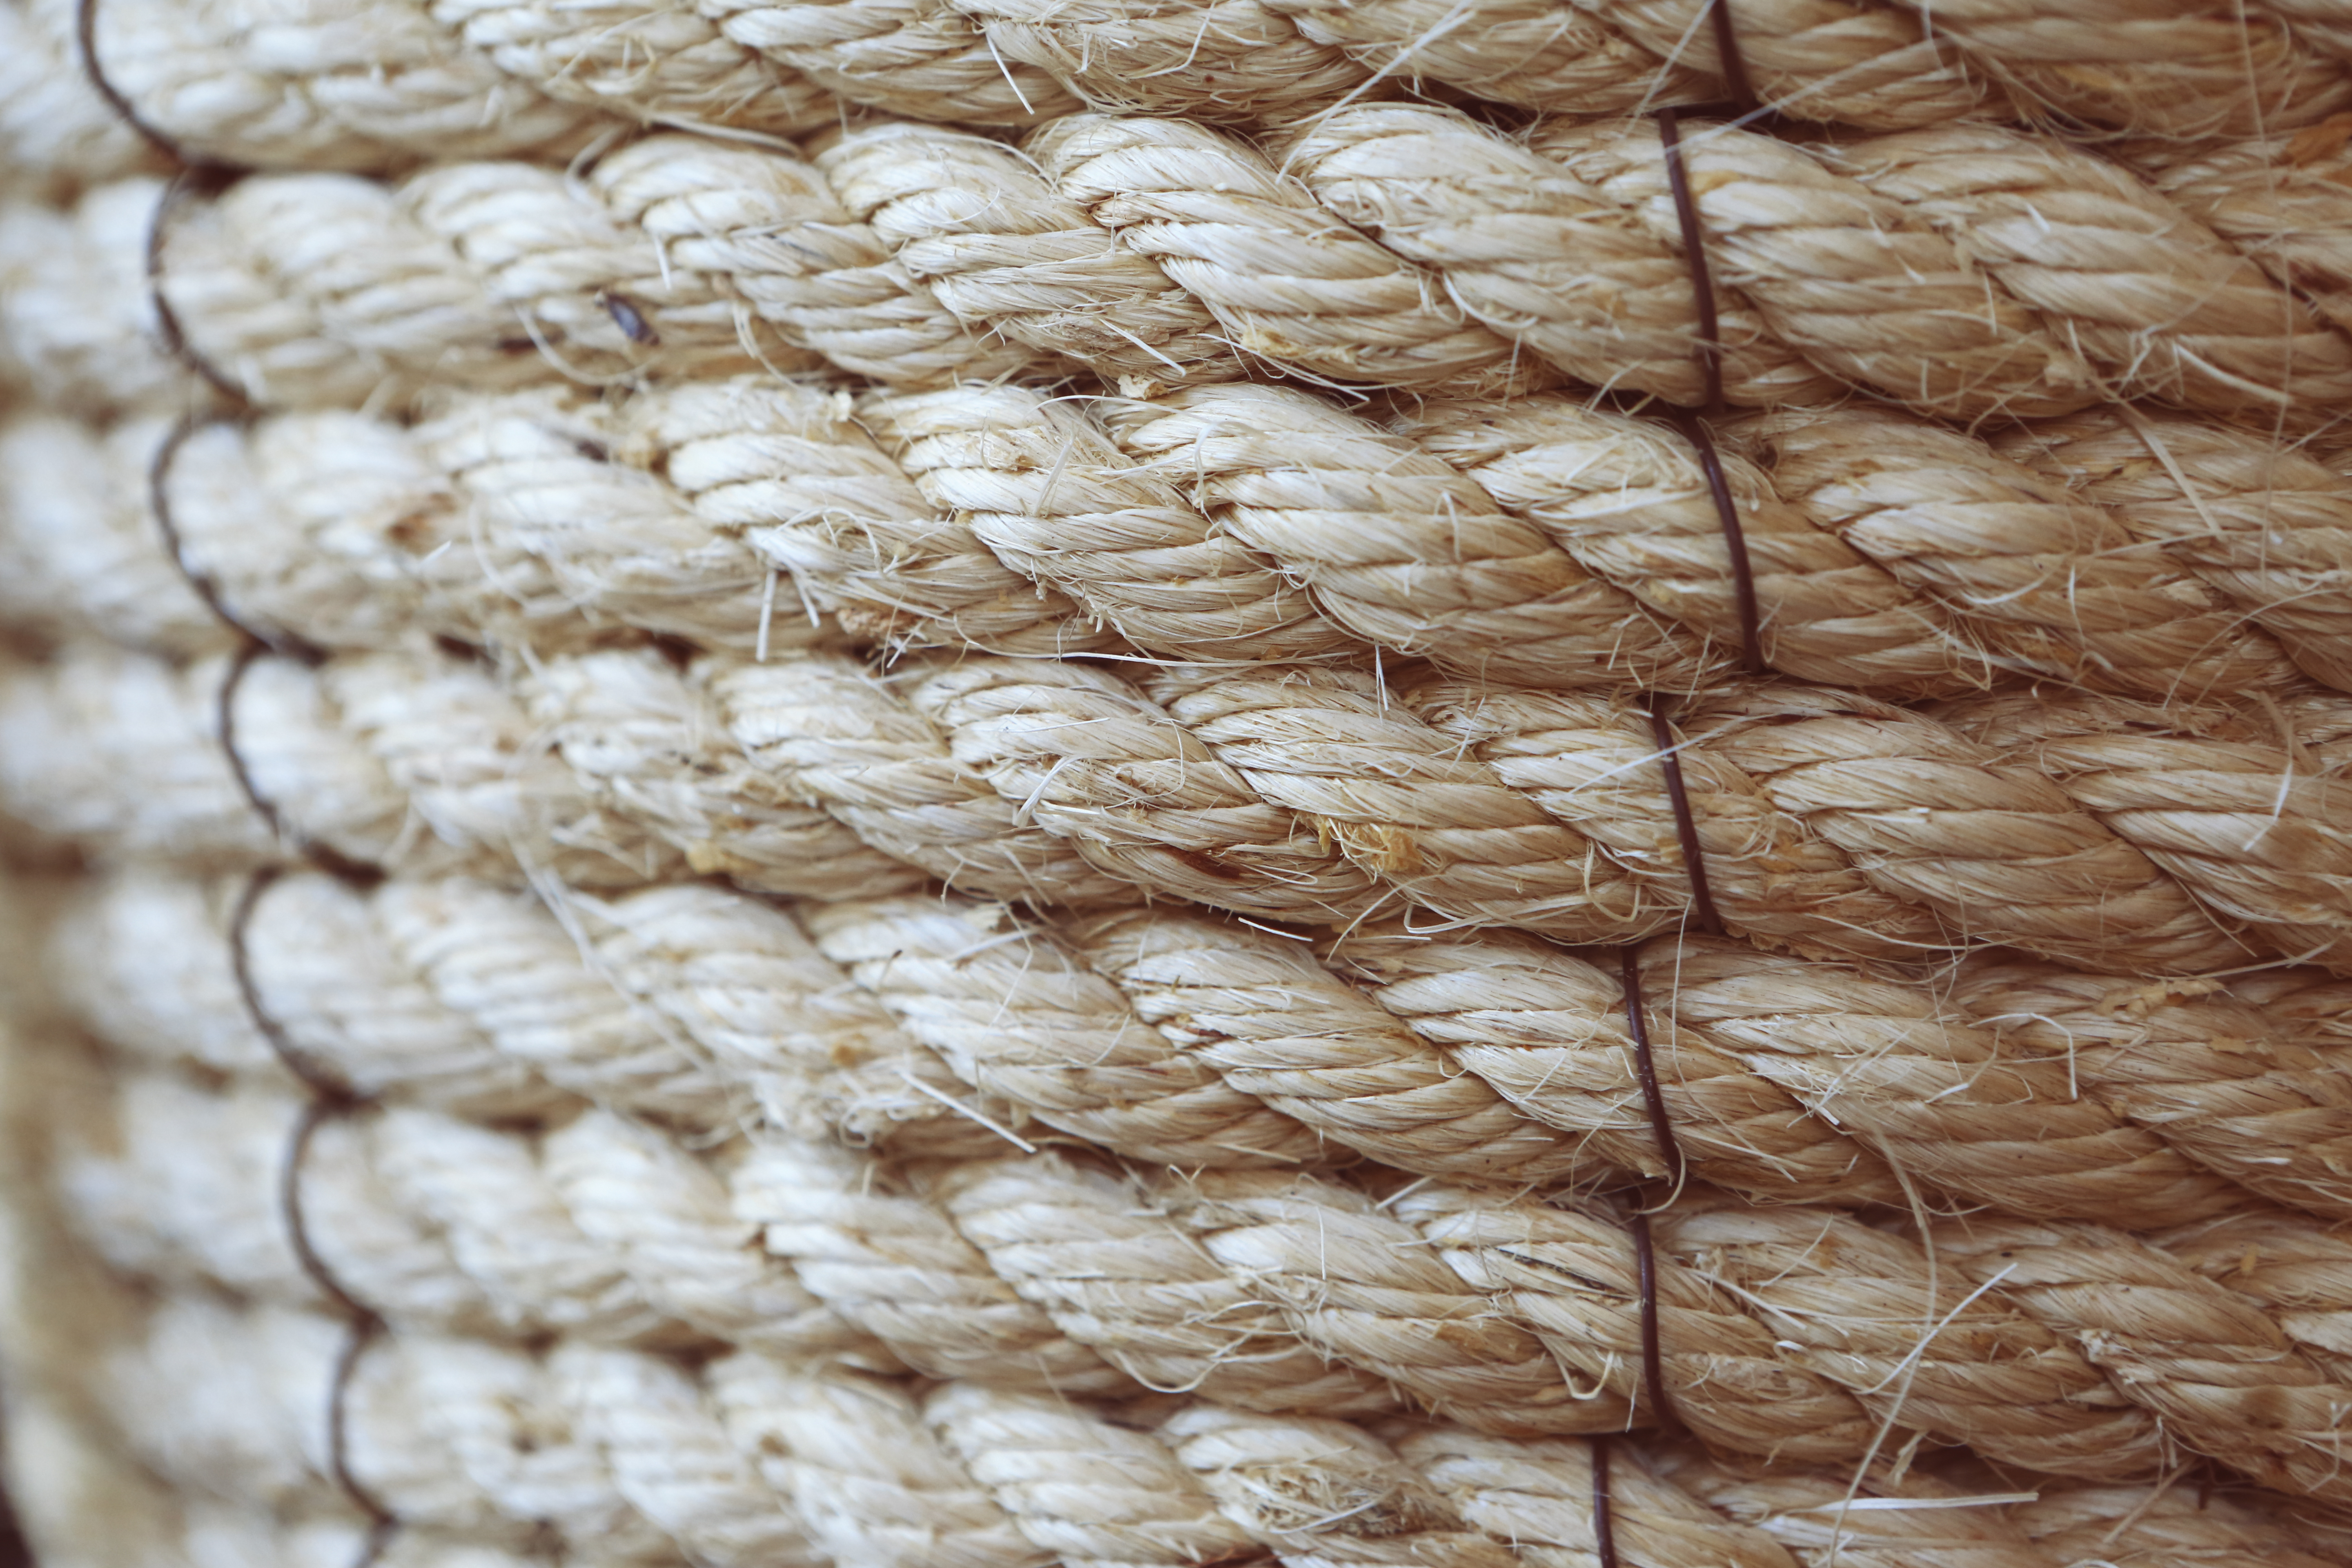 The ropes of life